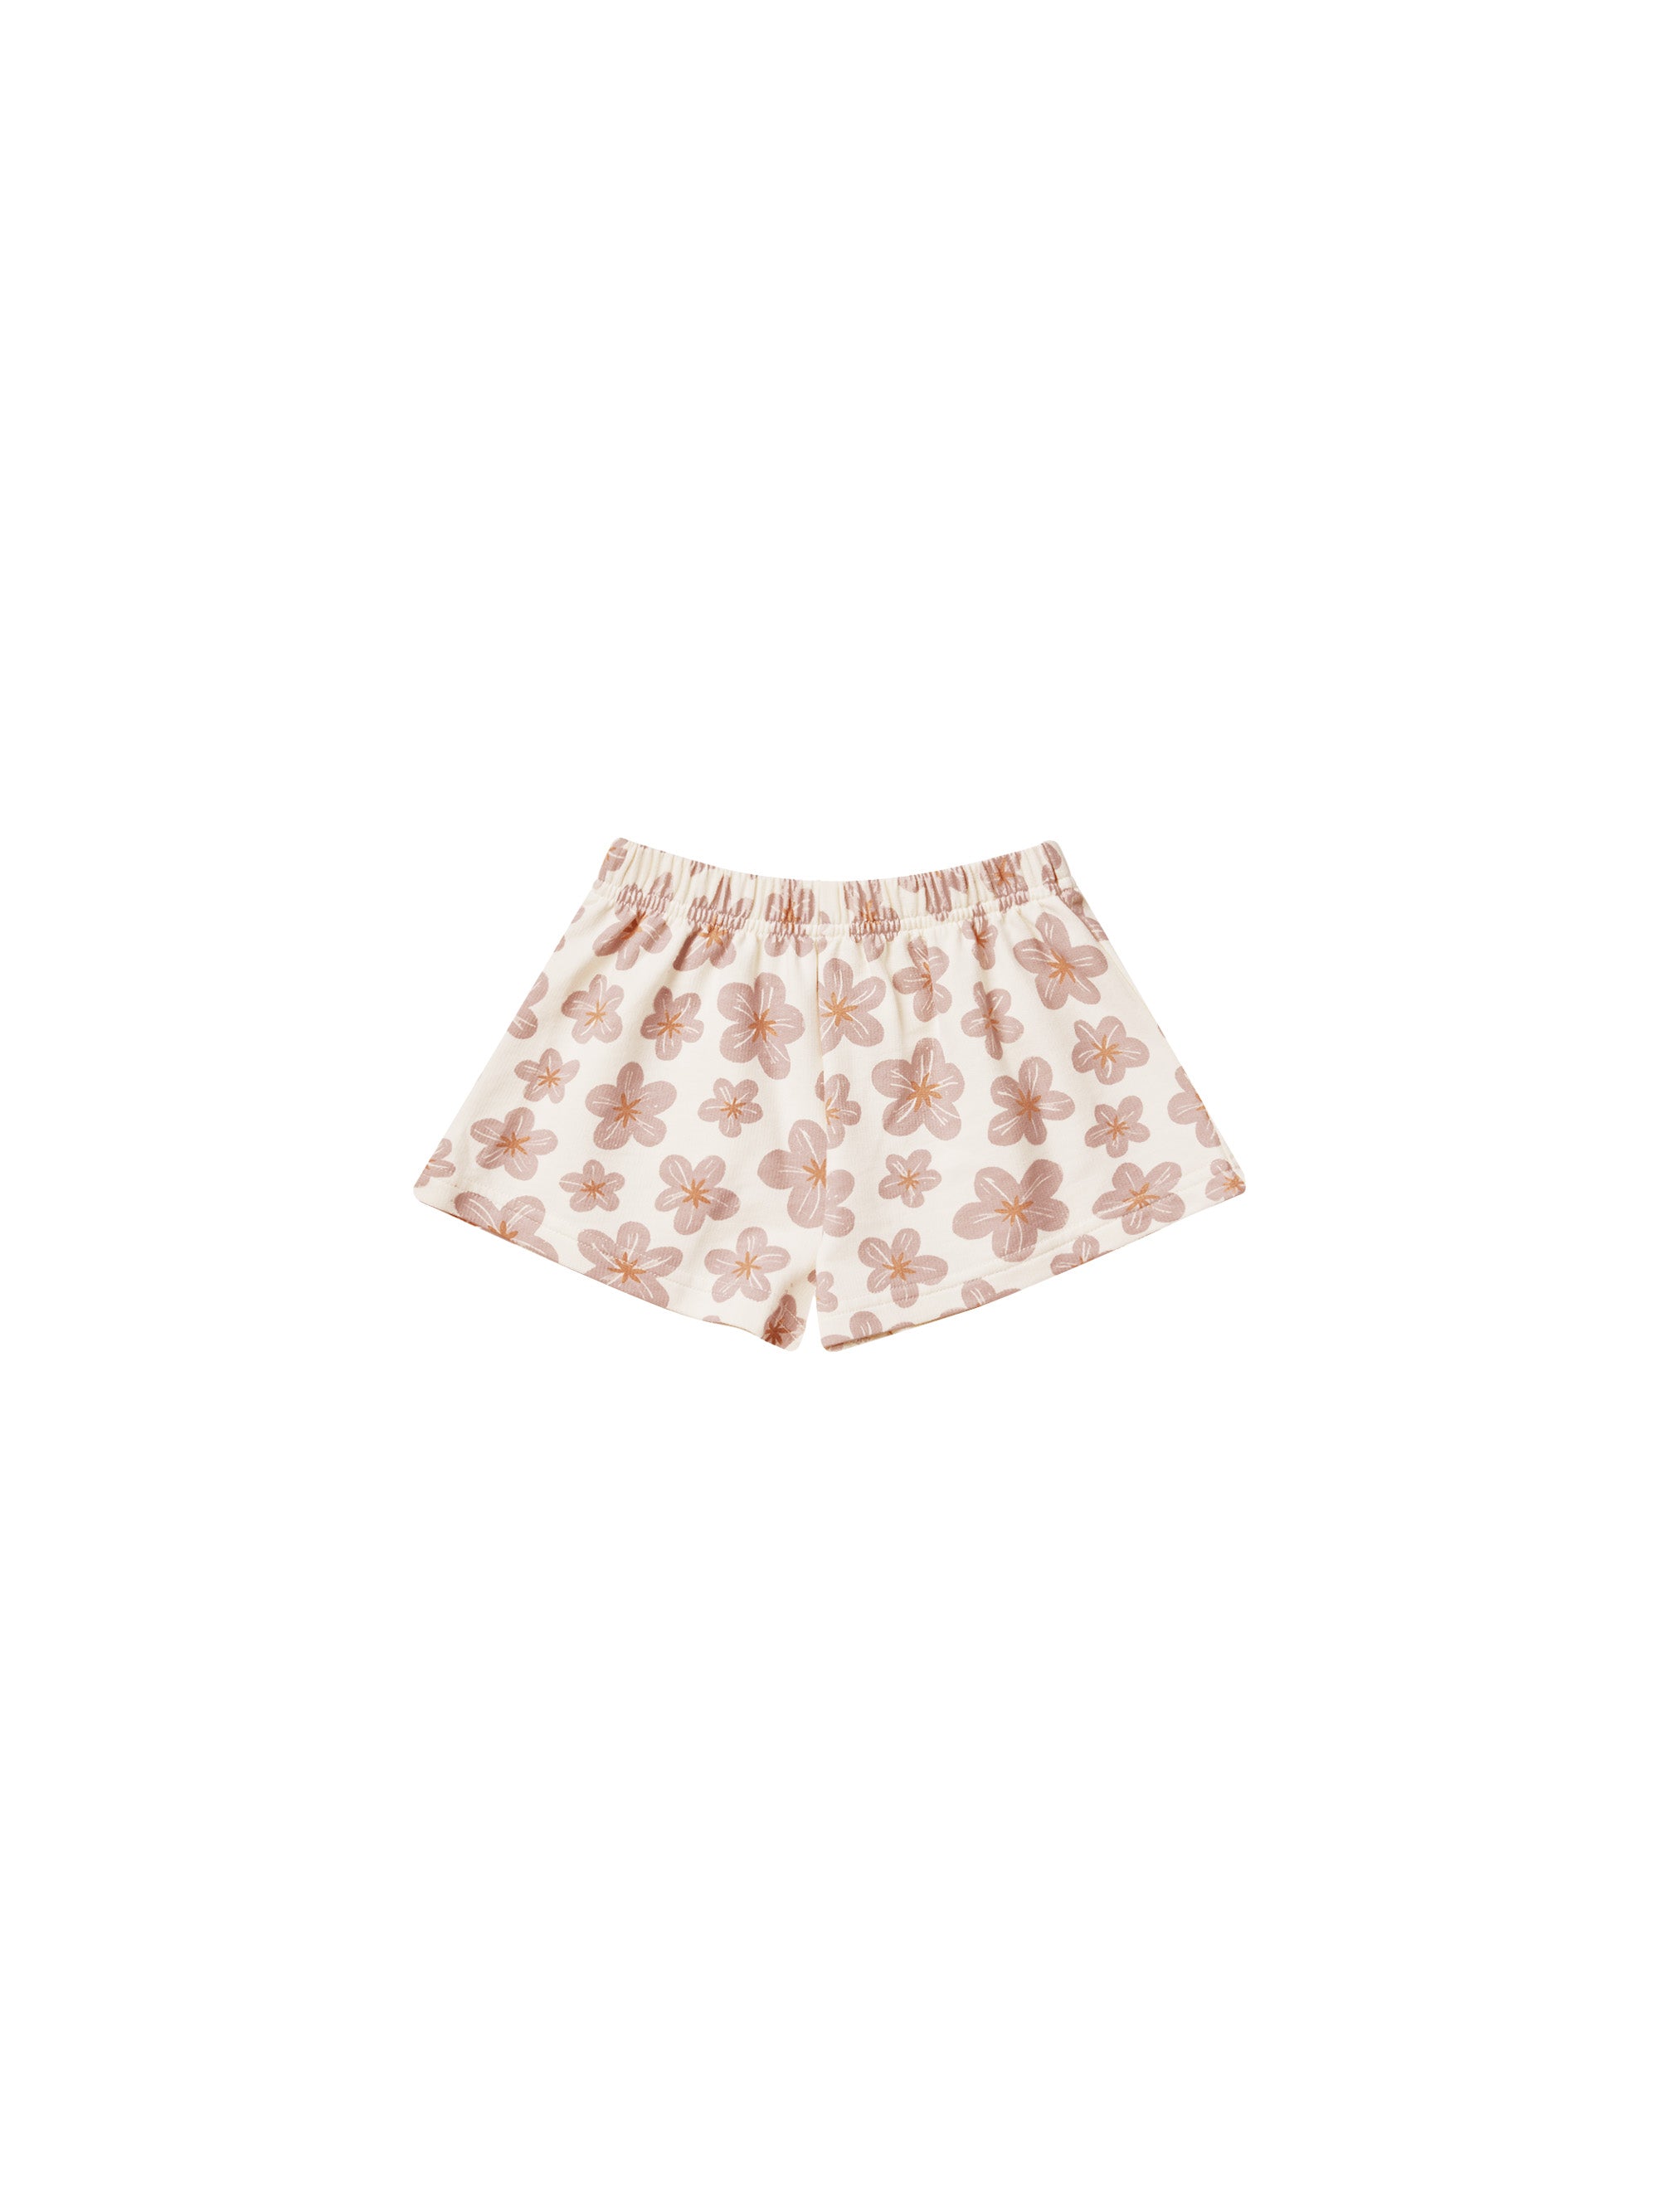 Track Shorts- Hibiscus - Twinkle Twinkle Little One